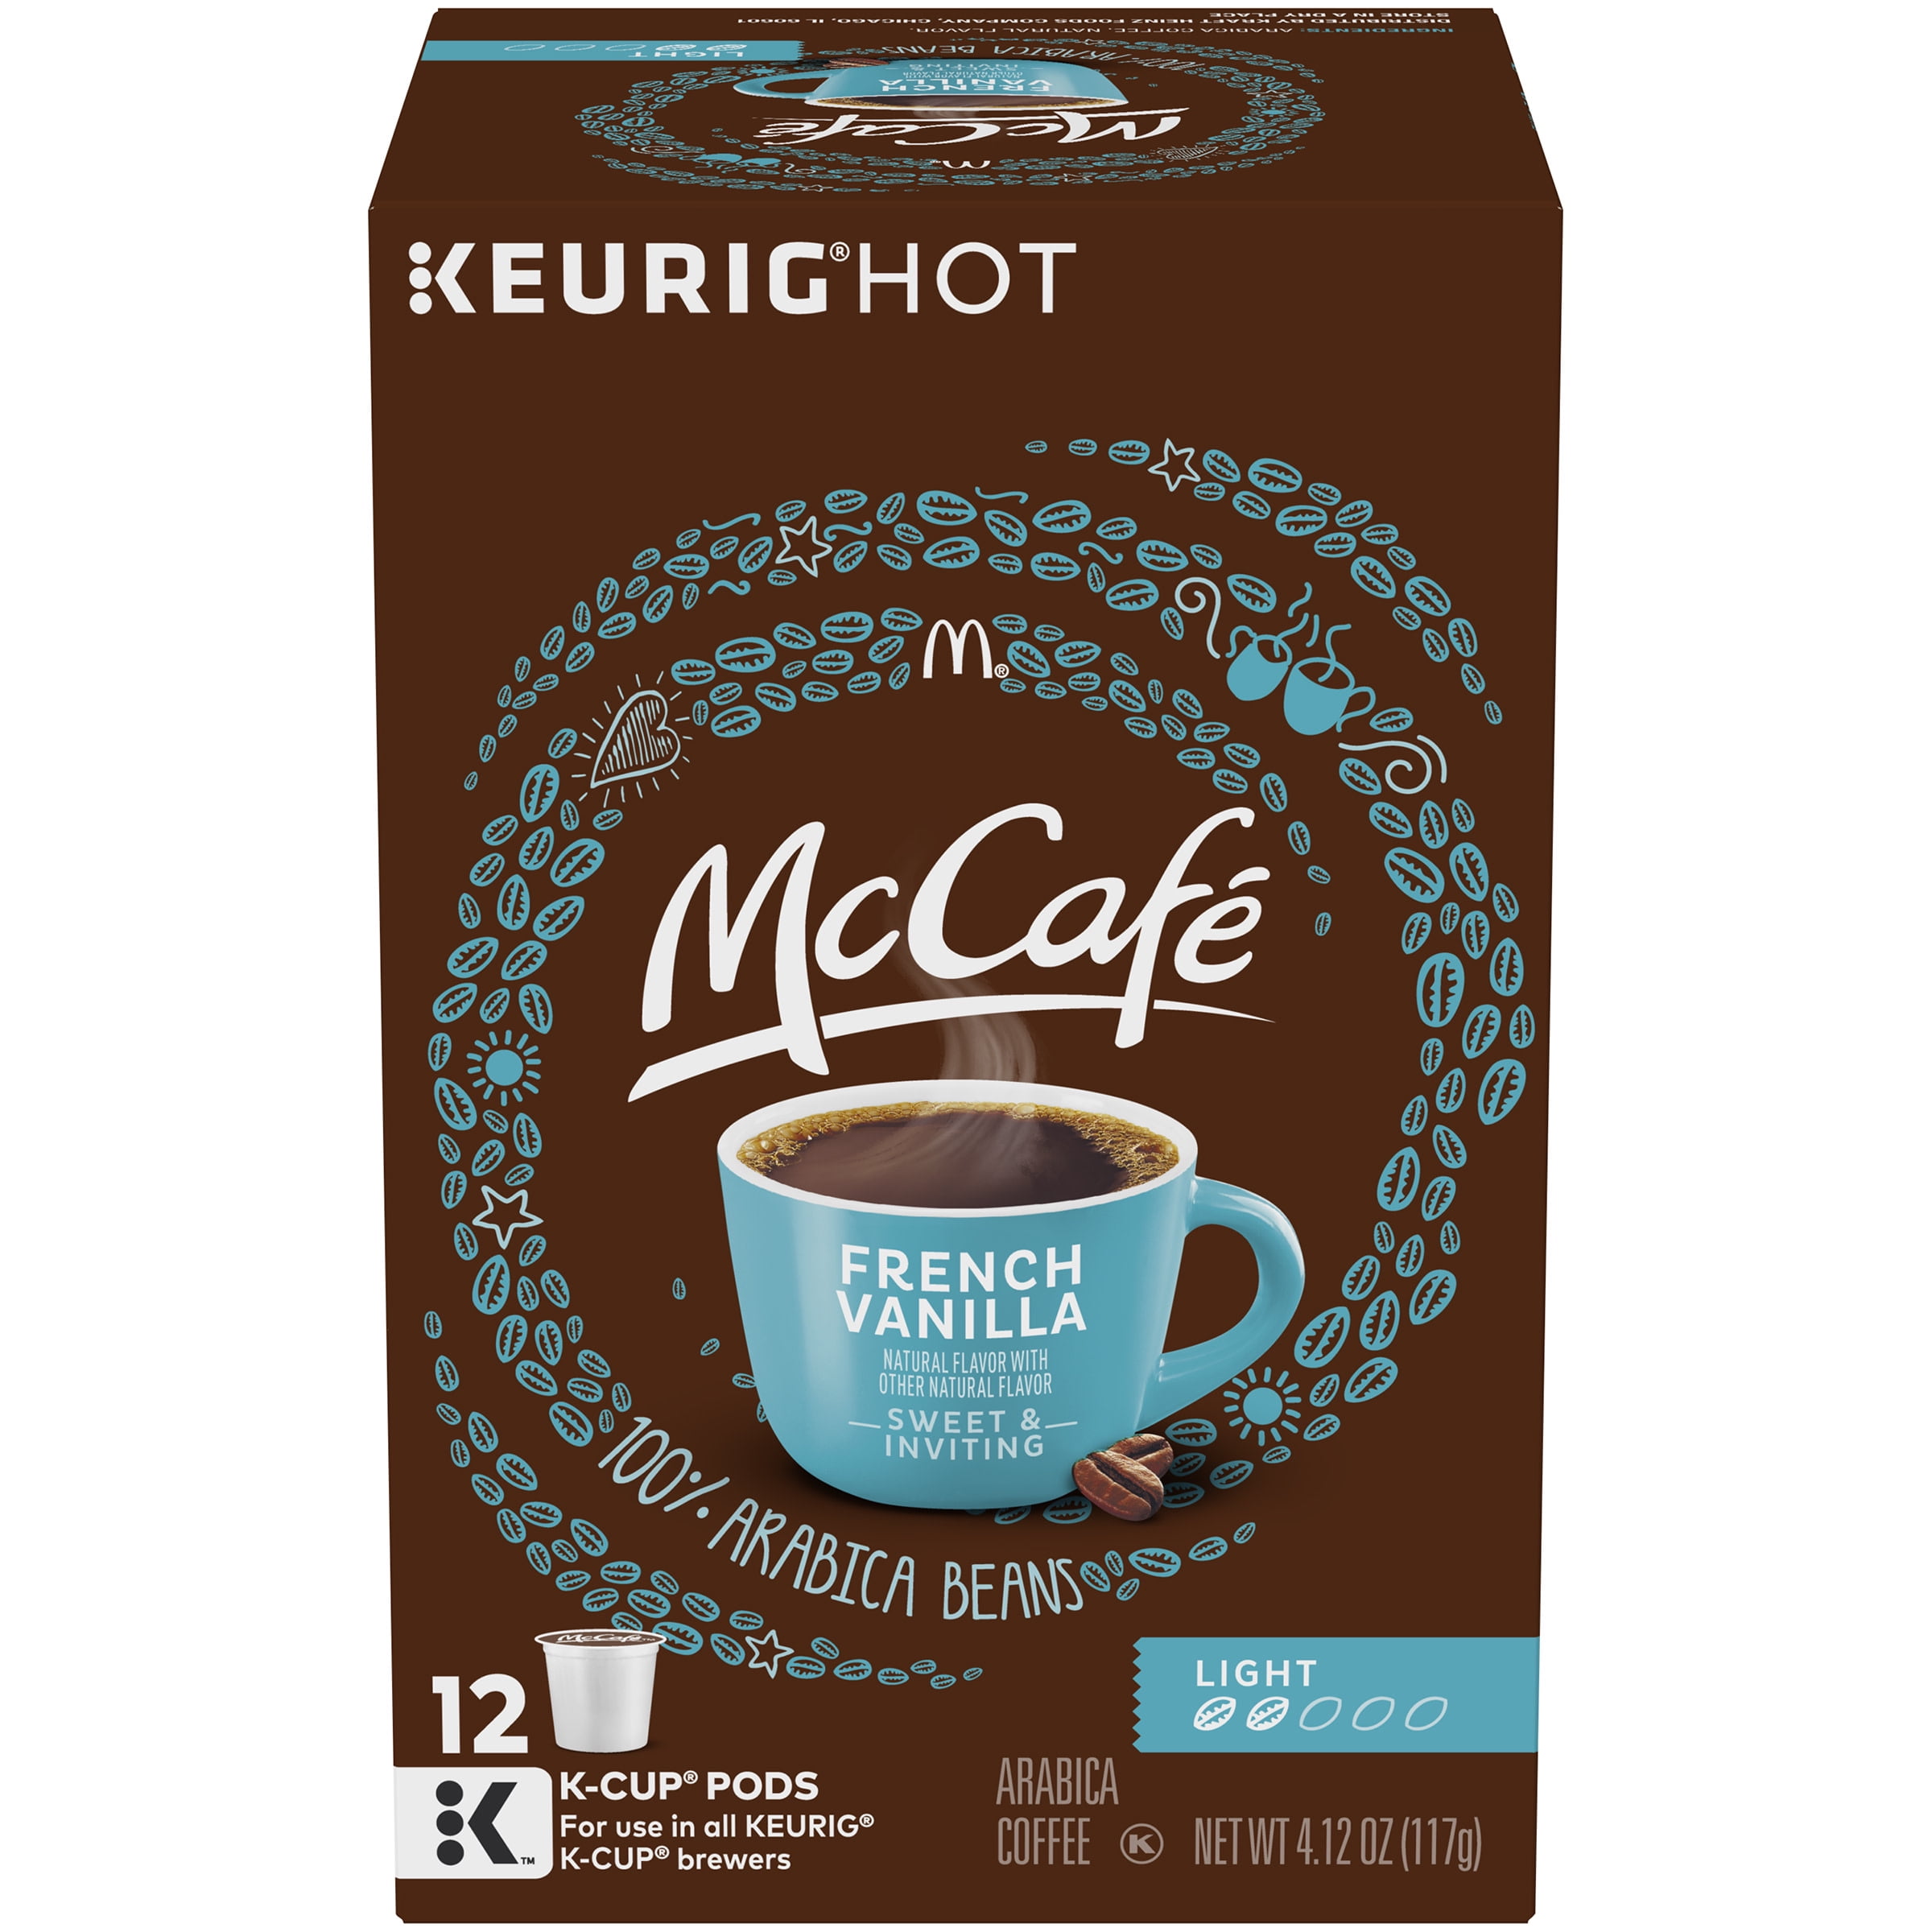 McCafe Iced One Step French Vanilla Latte K-Cup Pods (10 Count)